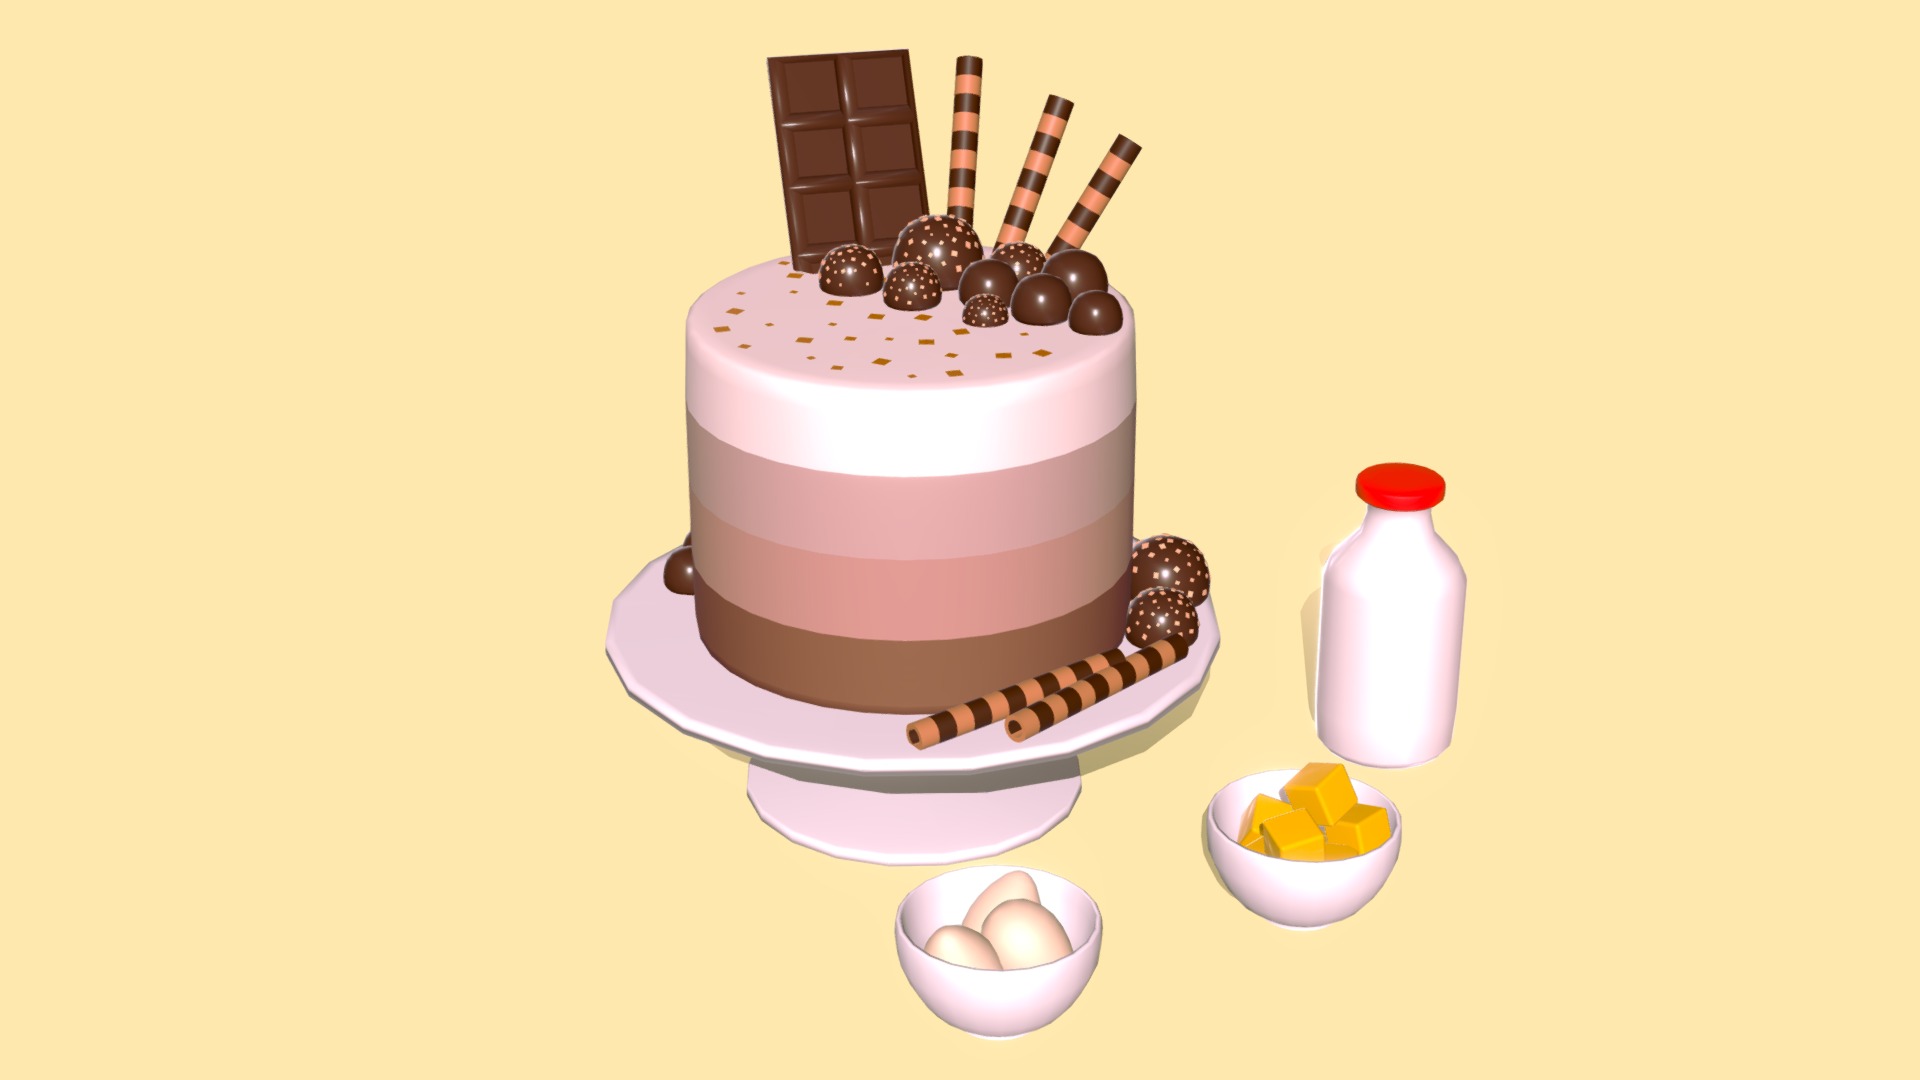 3D model National Cake Day - This is a 3D model of the National Cake Day. The 3D model is about a cake with a candle and a bowl of fruit.